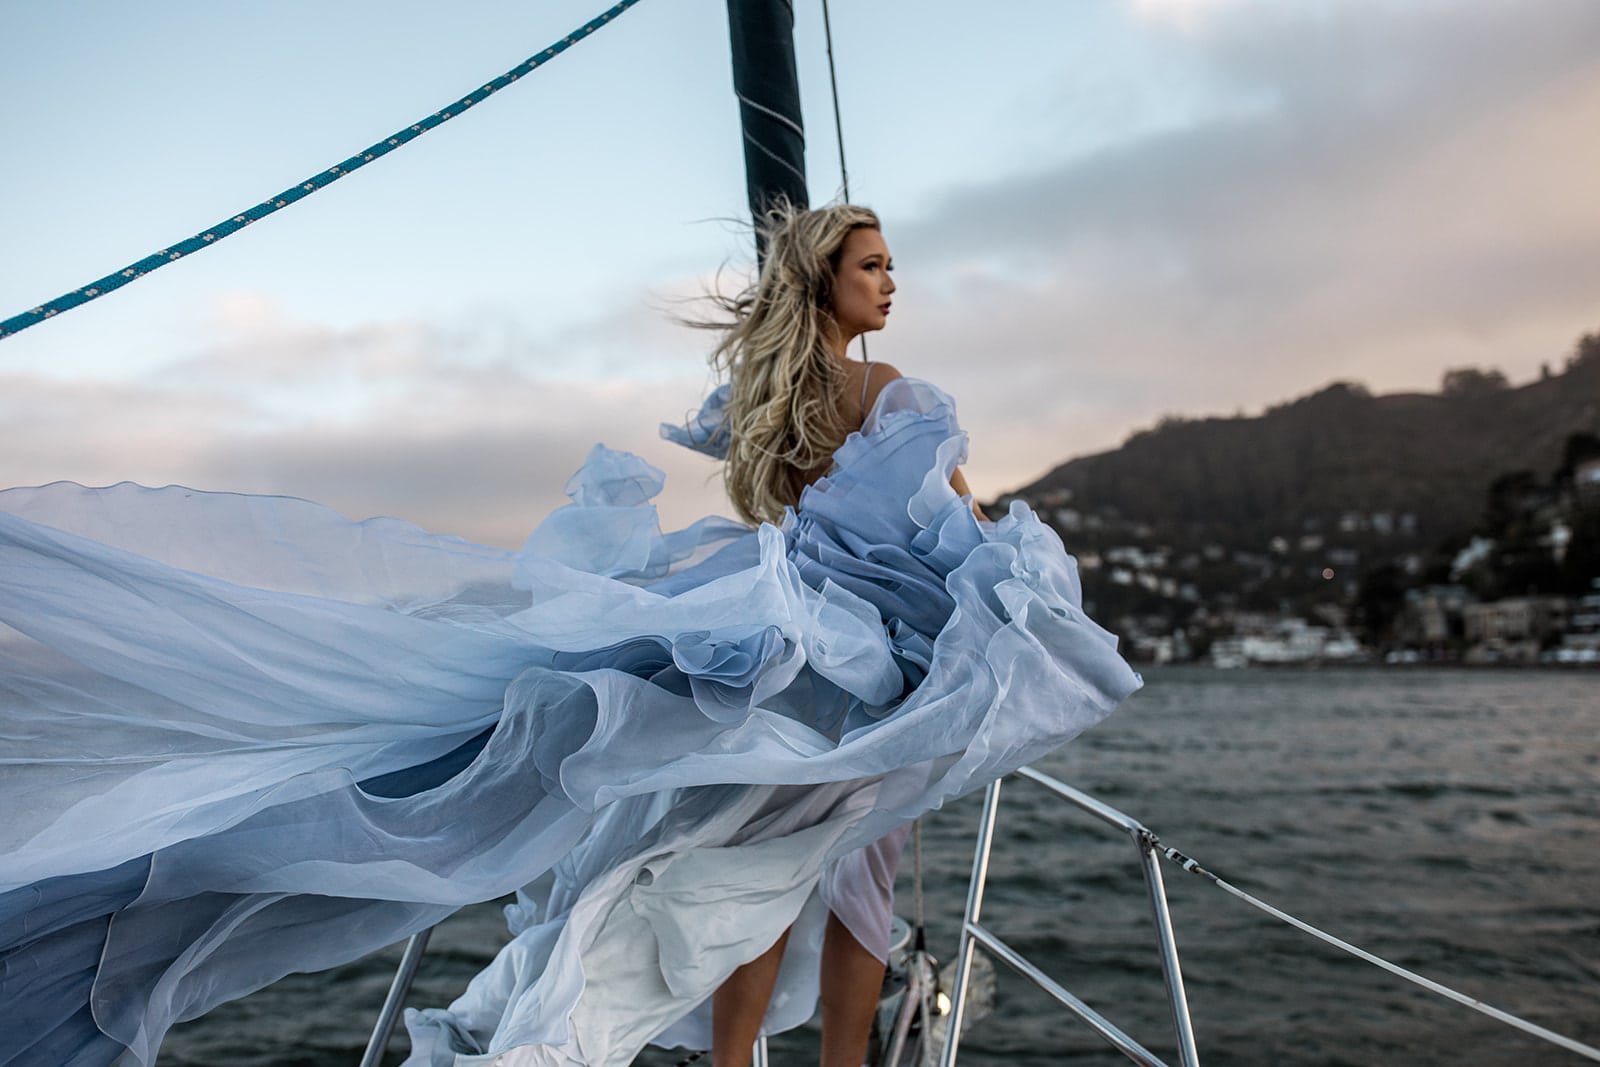 Woman stands on sailboat in flowy blue gown